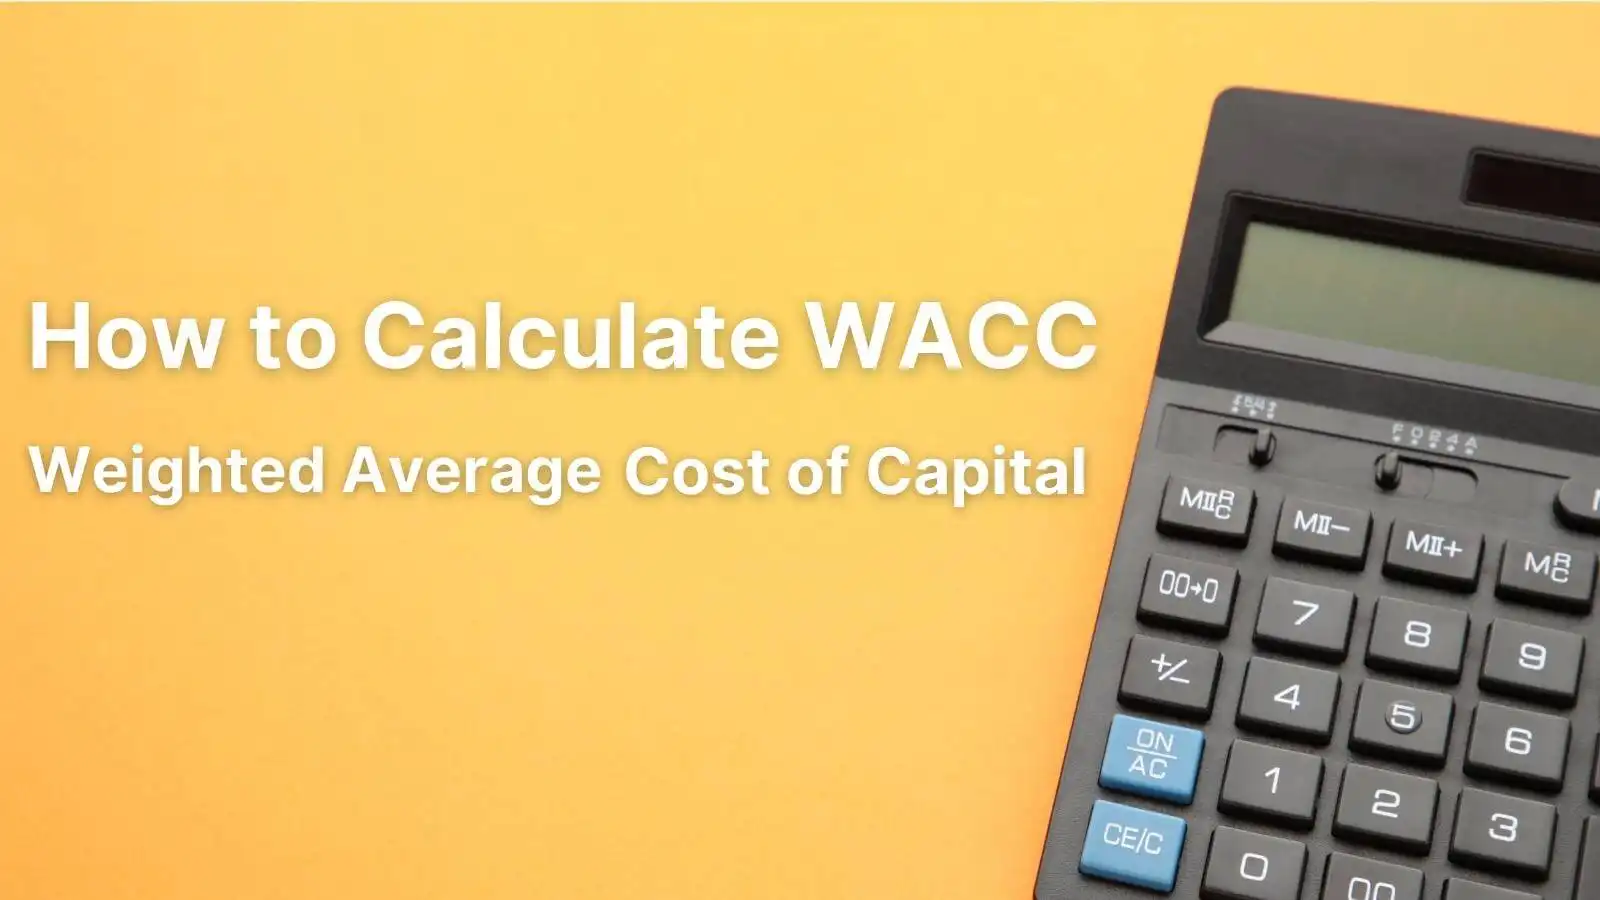 How To Calculate WACC (Weighted Average Cost of Capital)